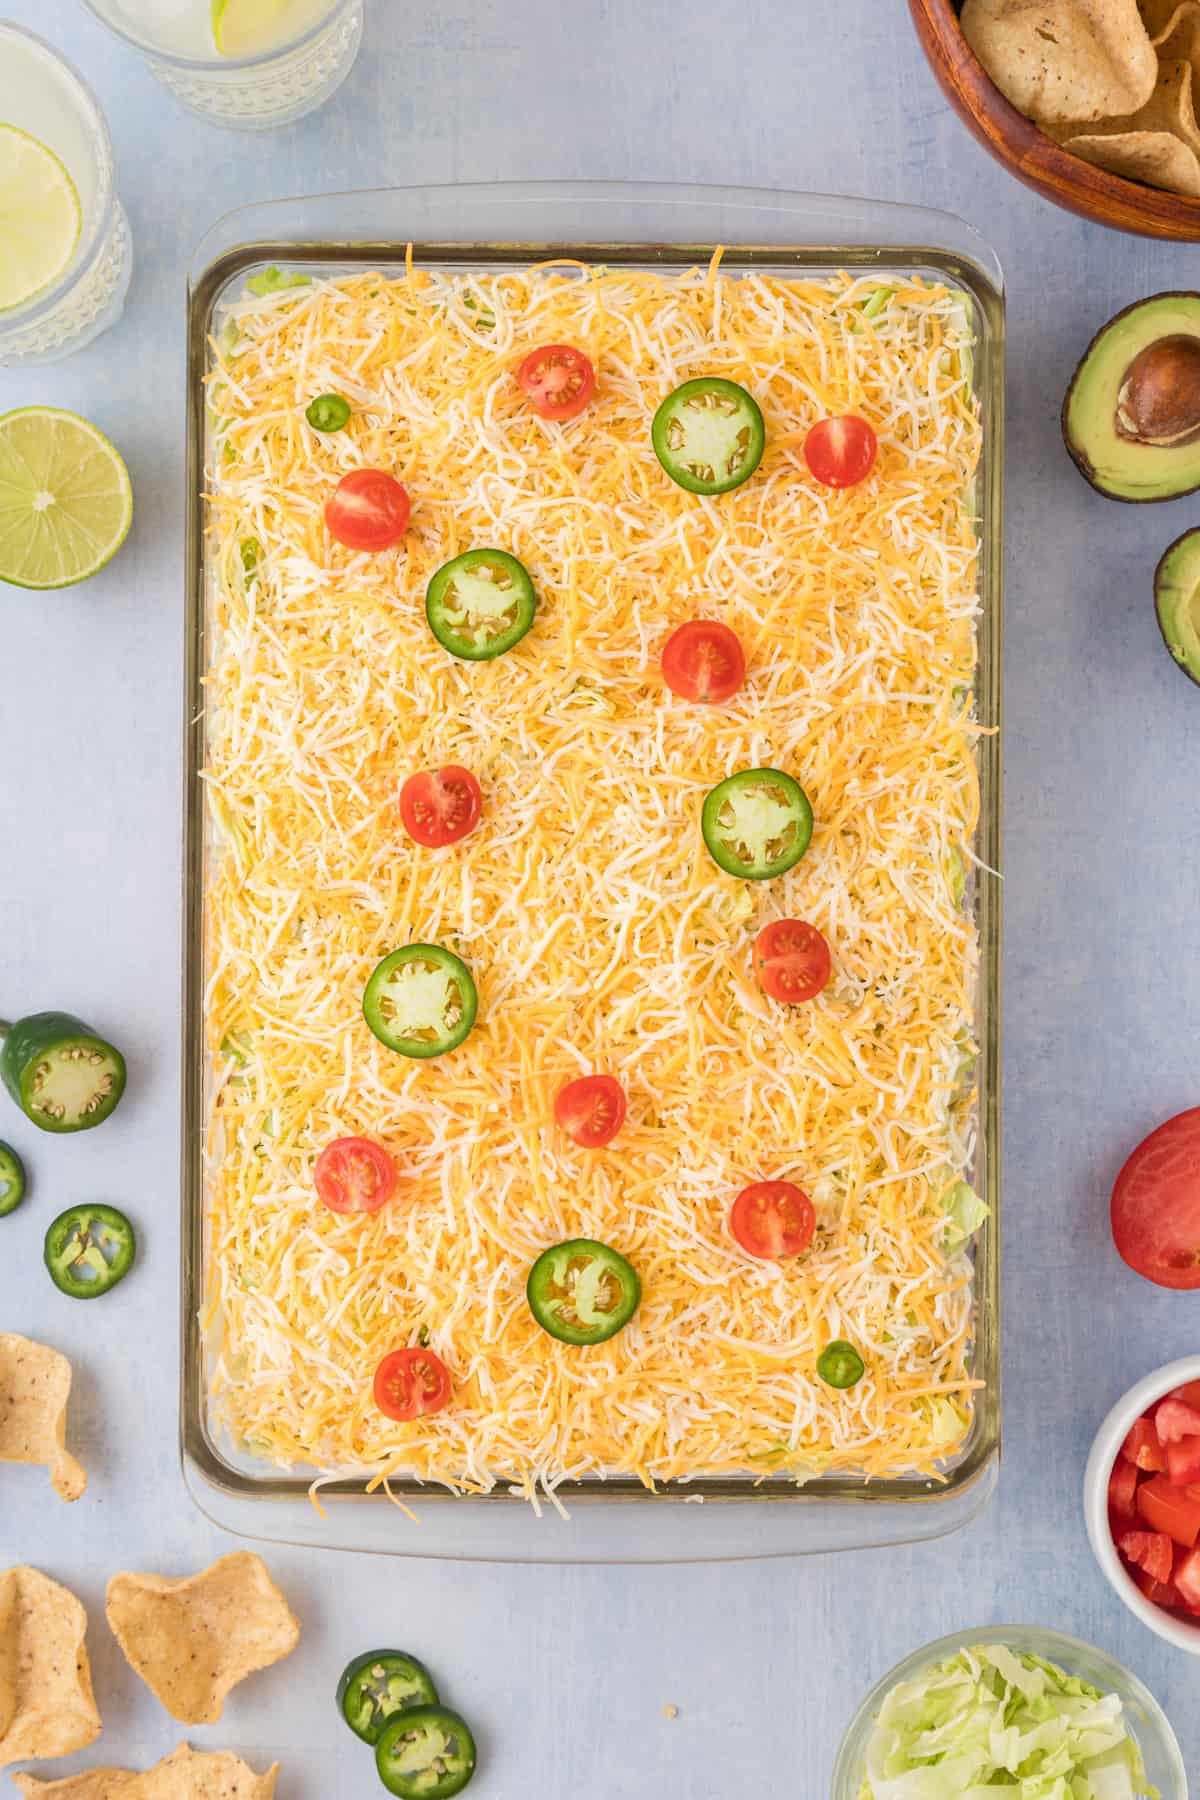 Finished layered taco dip in a casserole dish